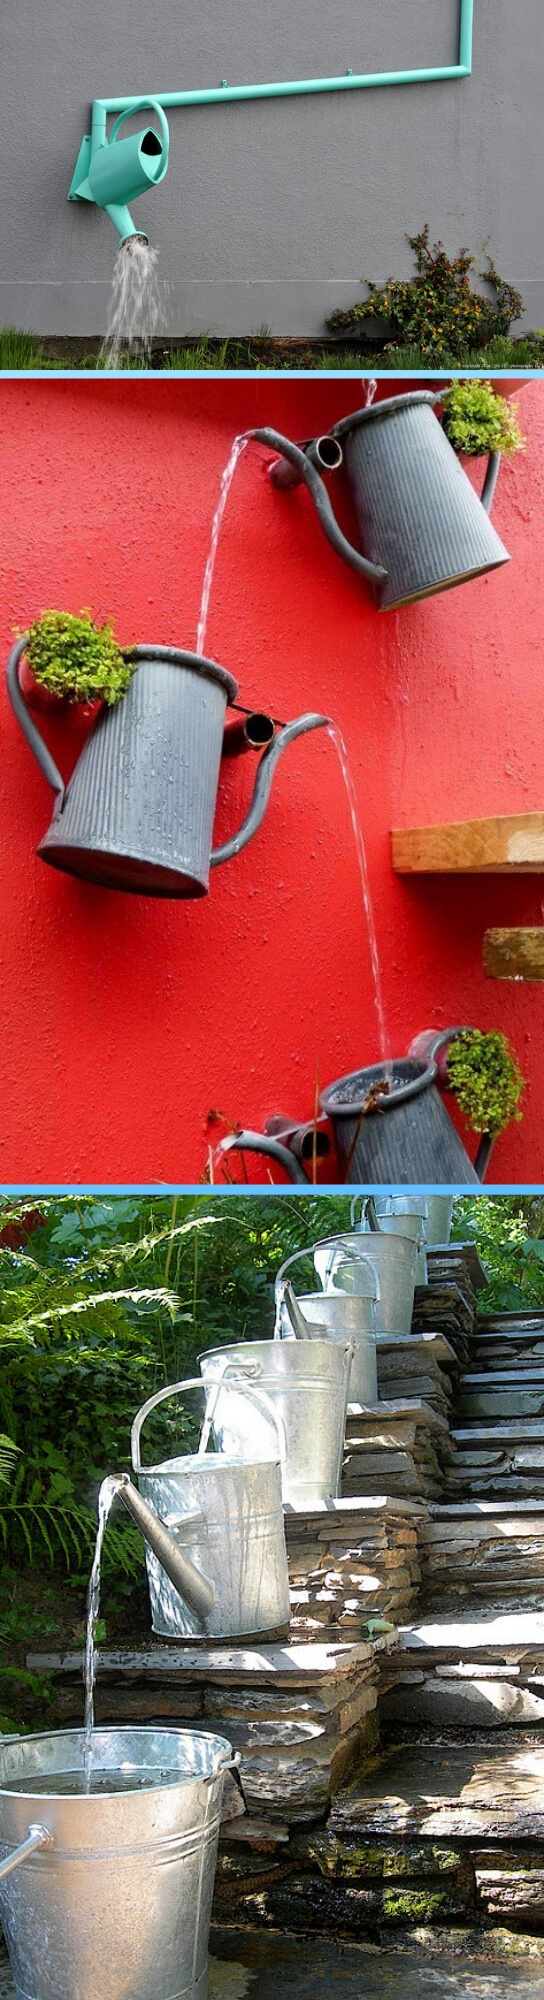 Watering can downspout | Best Downspout landscaping ideas